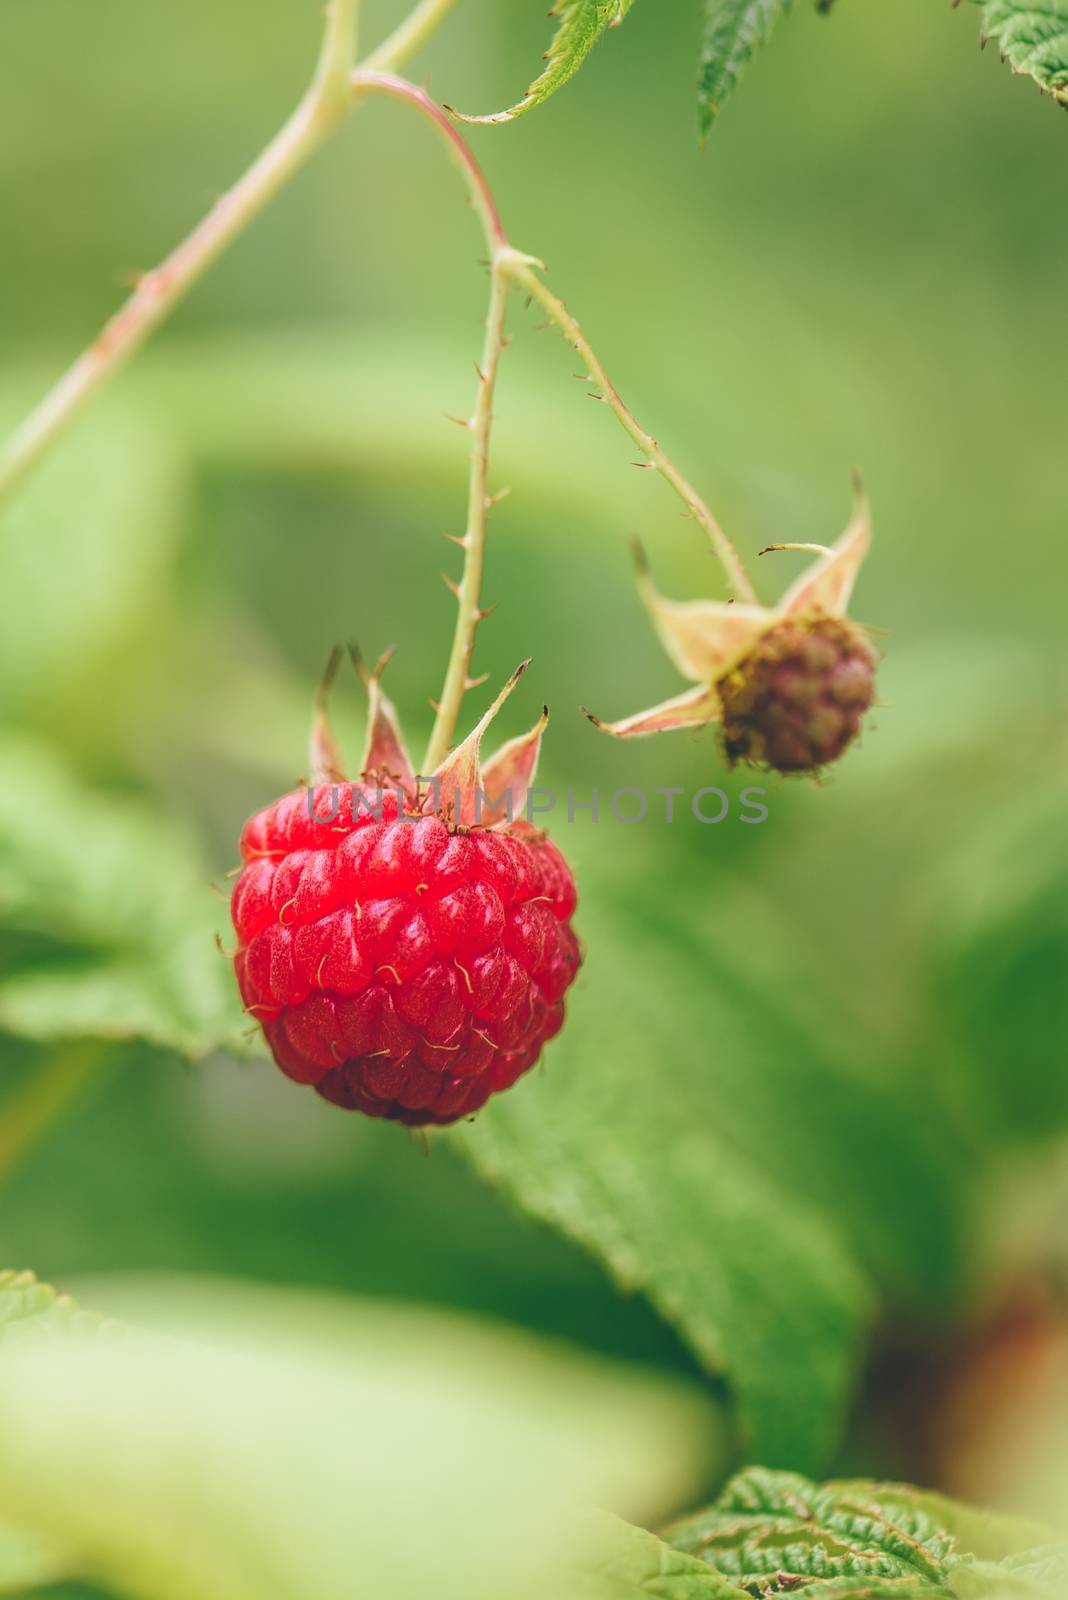 Raspberry with Leaves on a Branch. by Seva_blsv